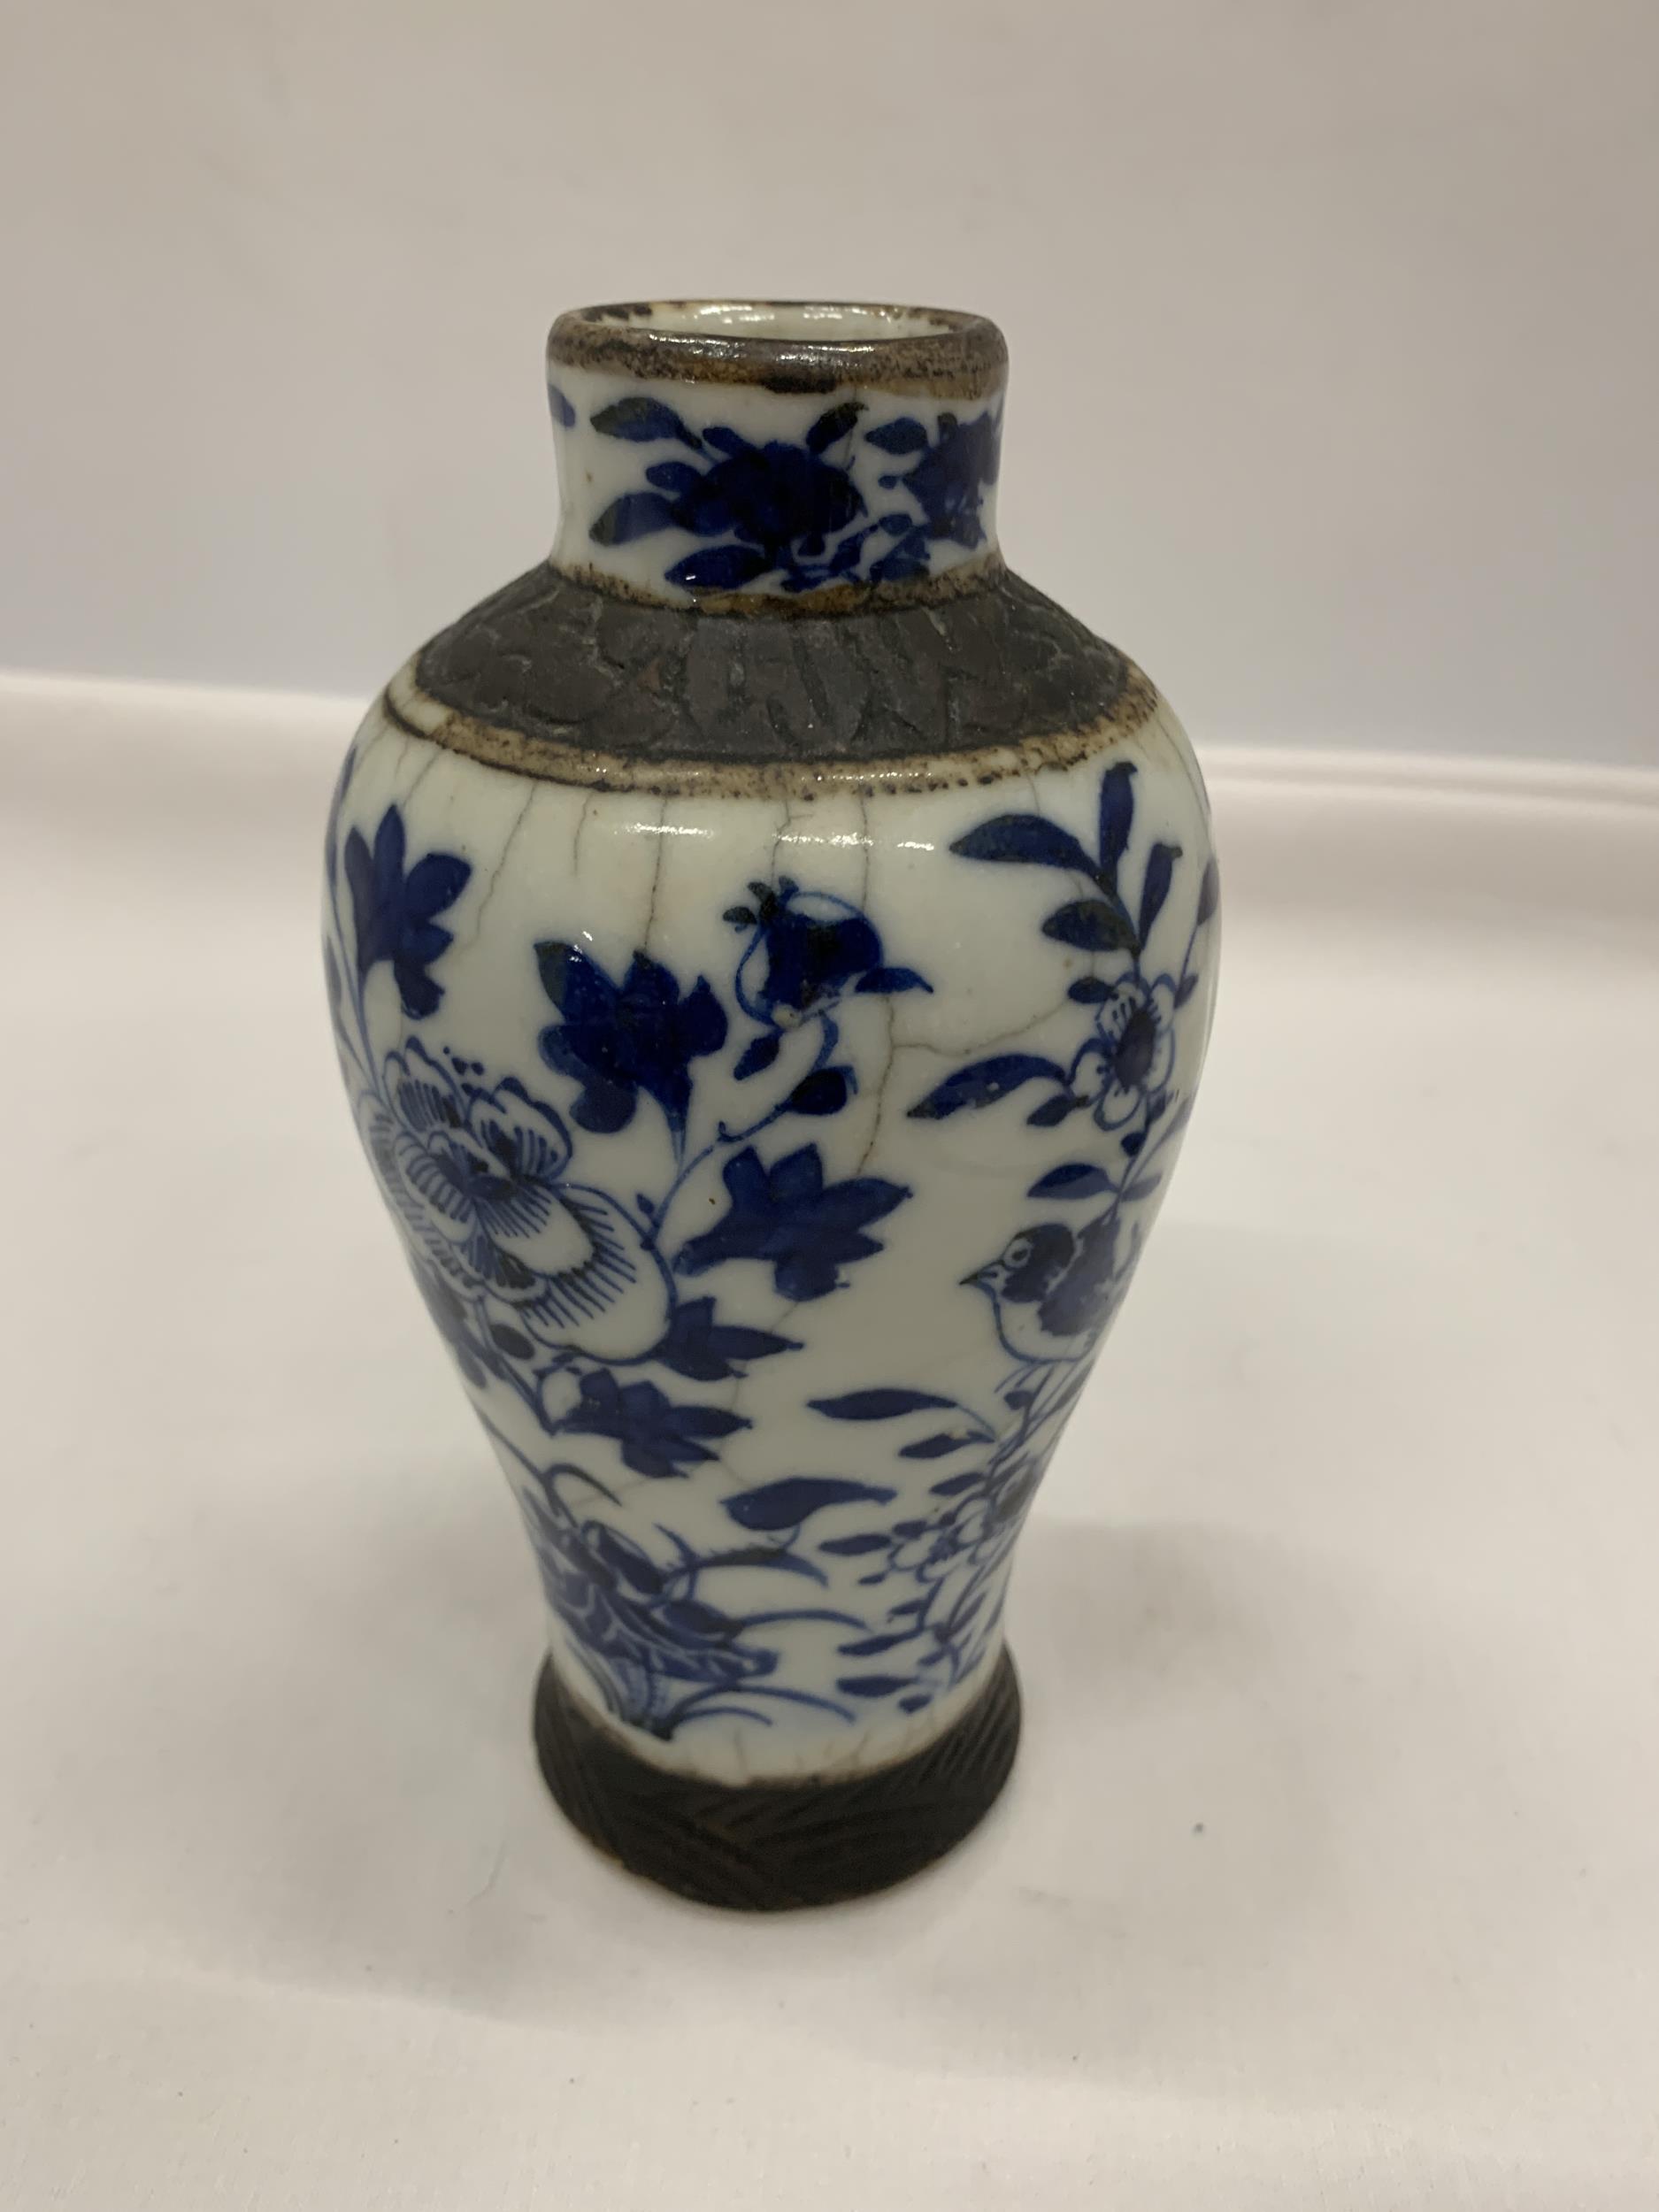 A LATE 19TH / EARLY 20TH CENTURY CHINESE BLUE AND WHITE CRACKLE GLAZE PORCELAIN VASE, FOUR CHARACTER - Image 2 of 5